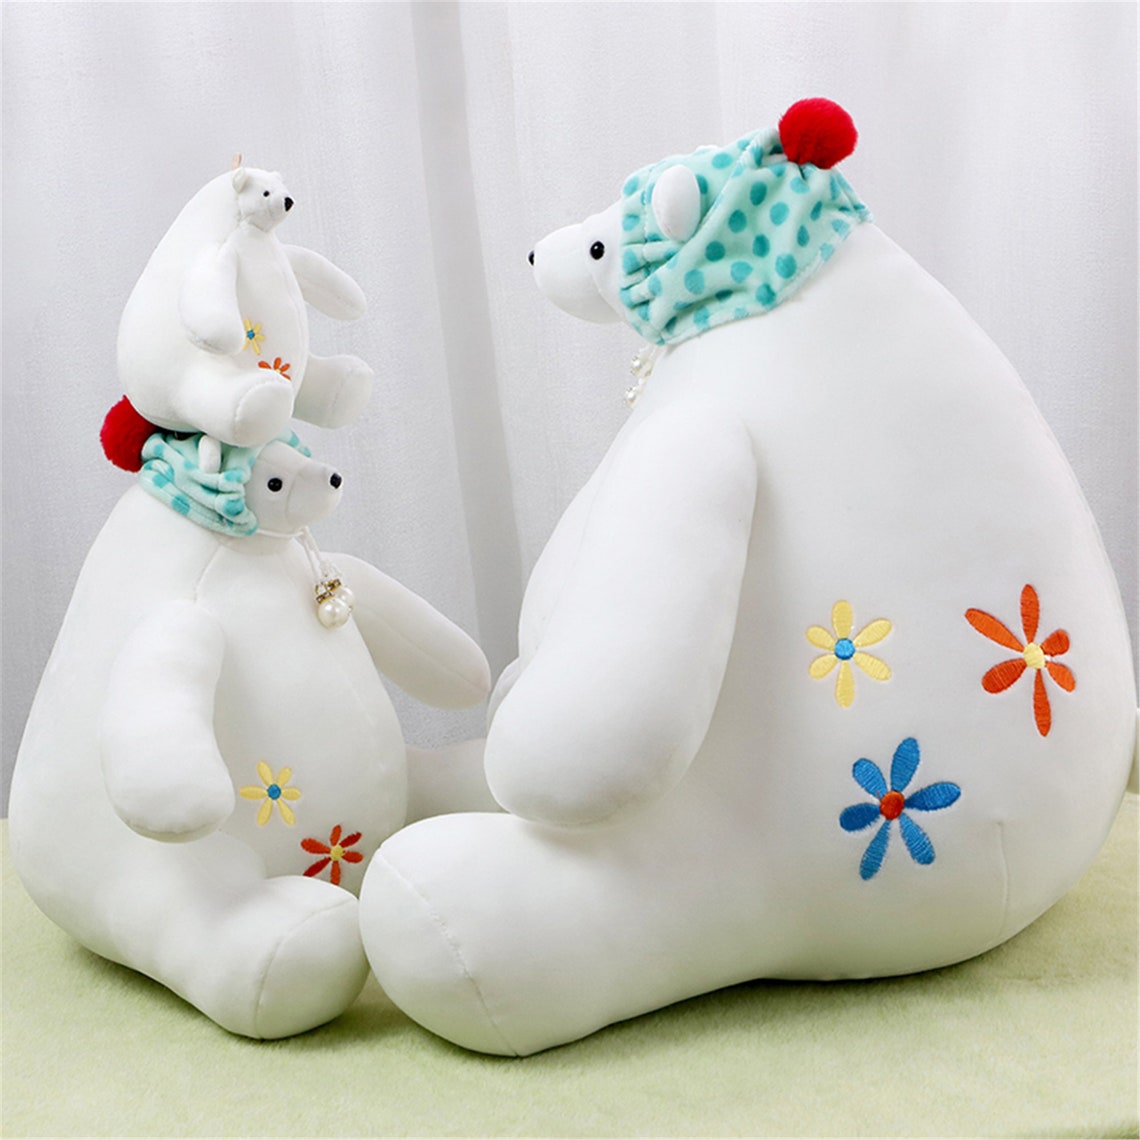 Fat white polar bear plush toy with flower embroidery